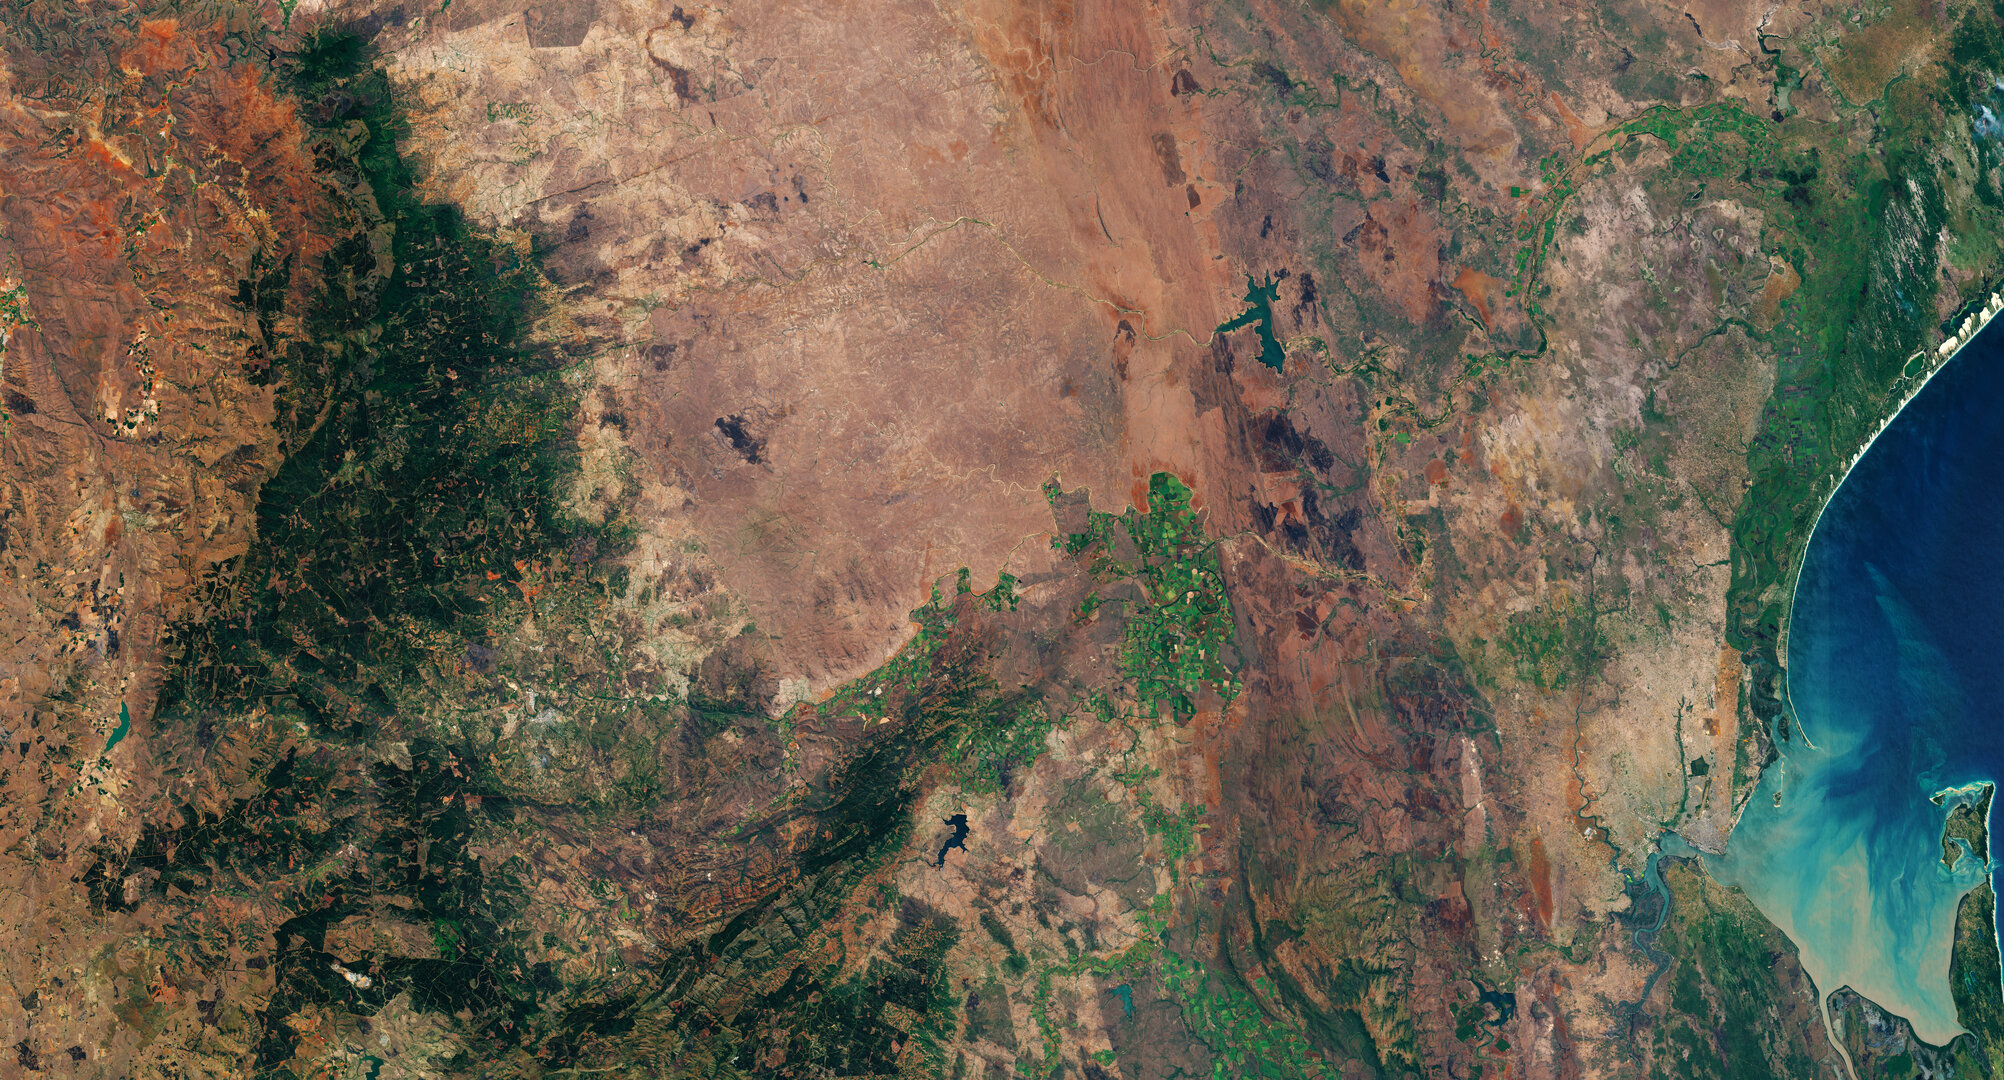 The Crocodile River traverses South Africa and Mozambique